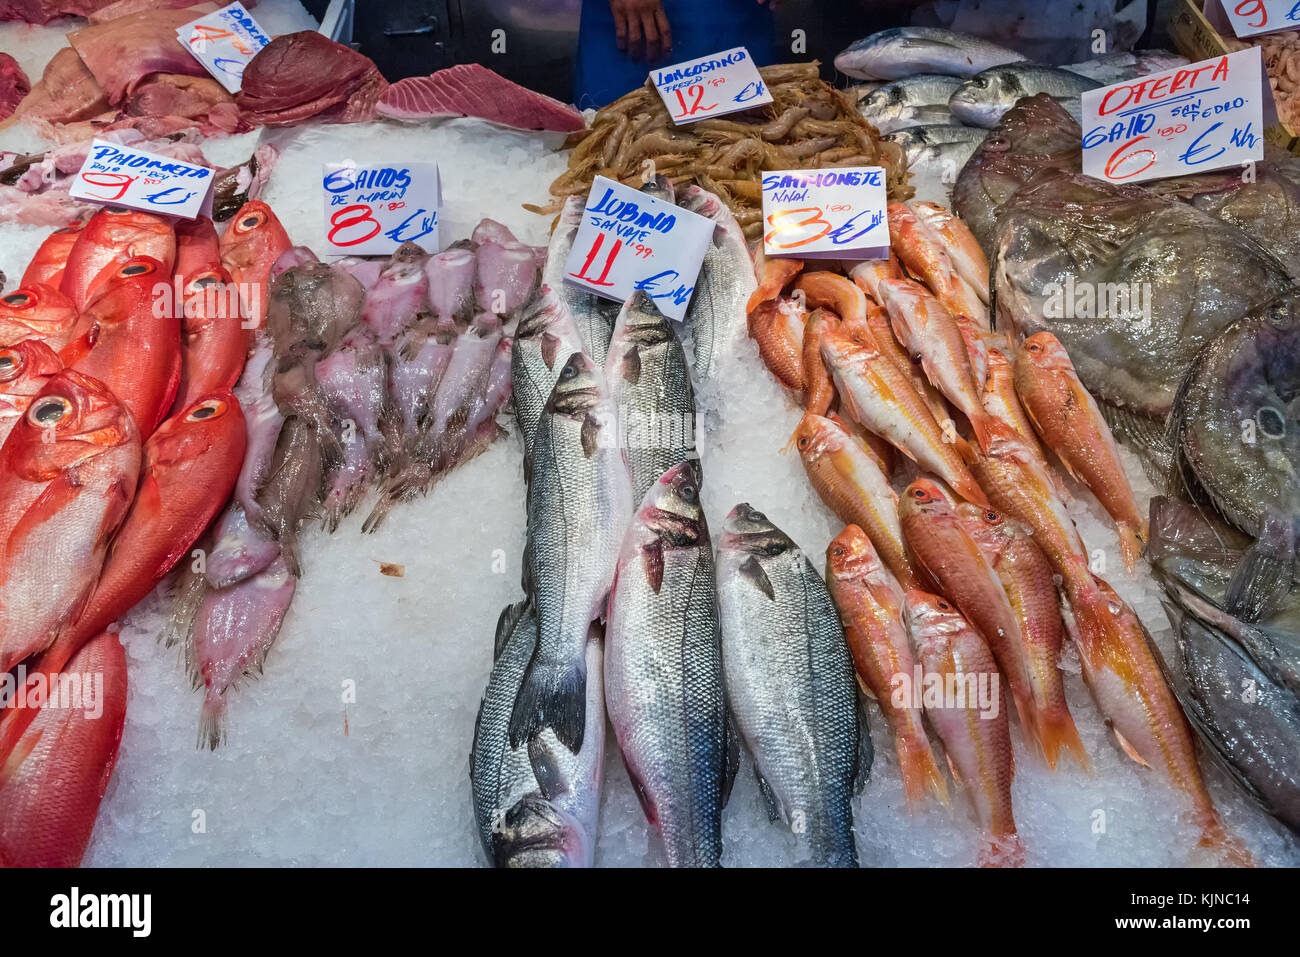 Fresh fish and seafood at a market in Madrid, Spain Stock Photo